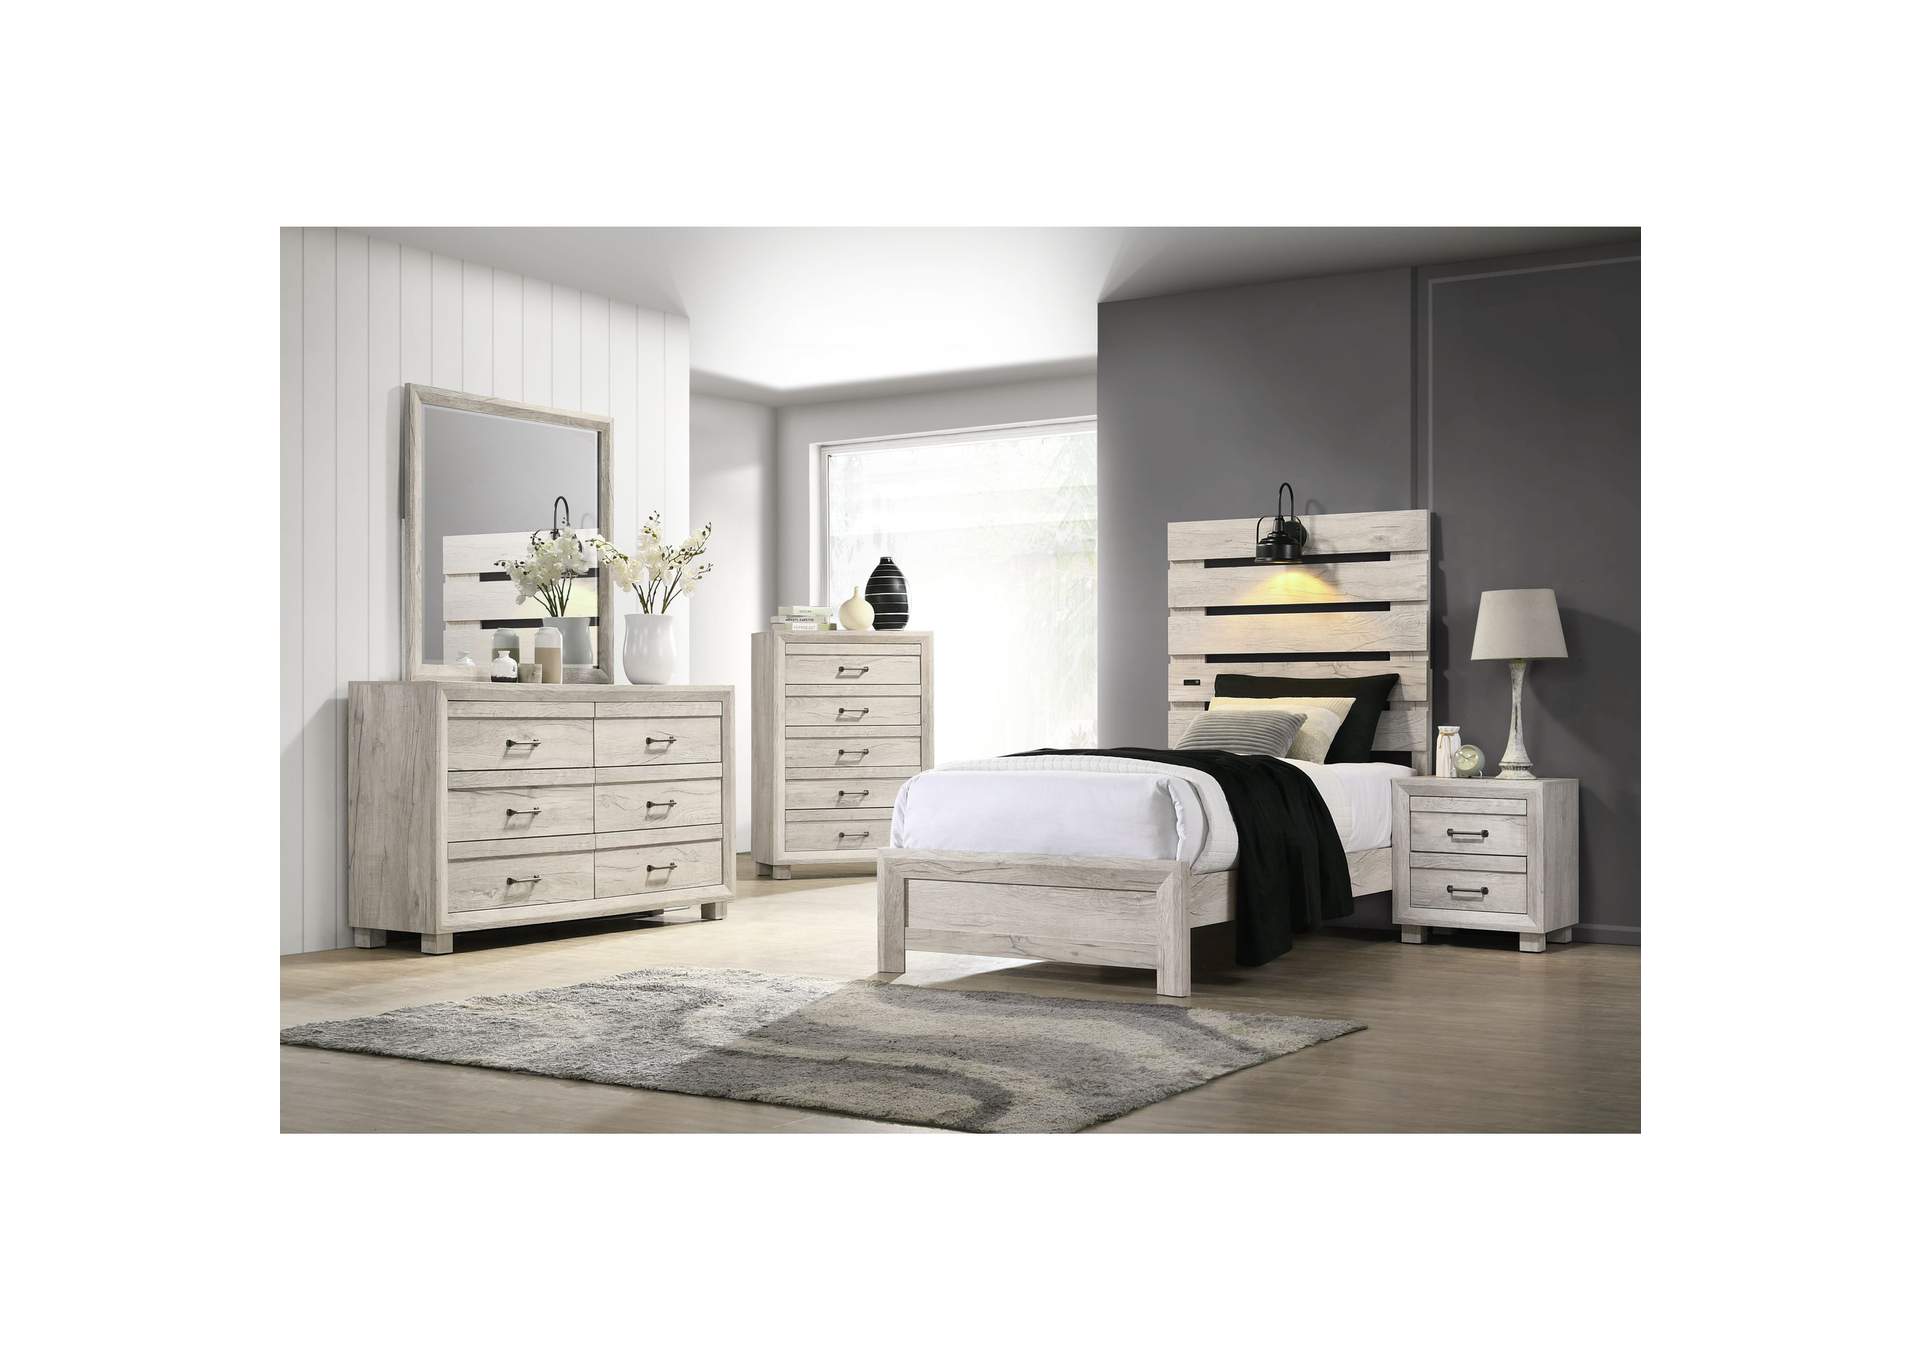 Fort Worth Twin Bed With Lights USB In White,Elements